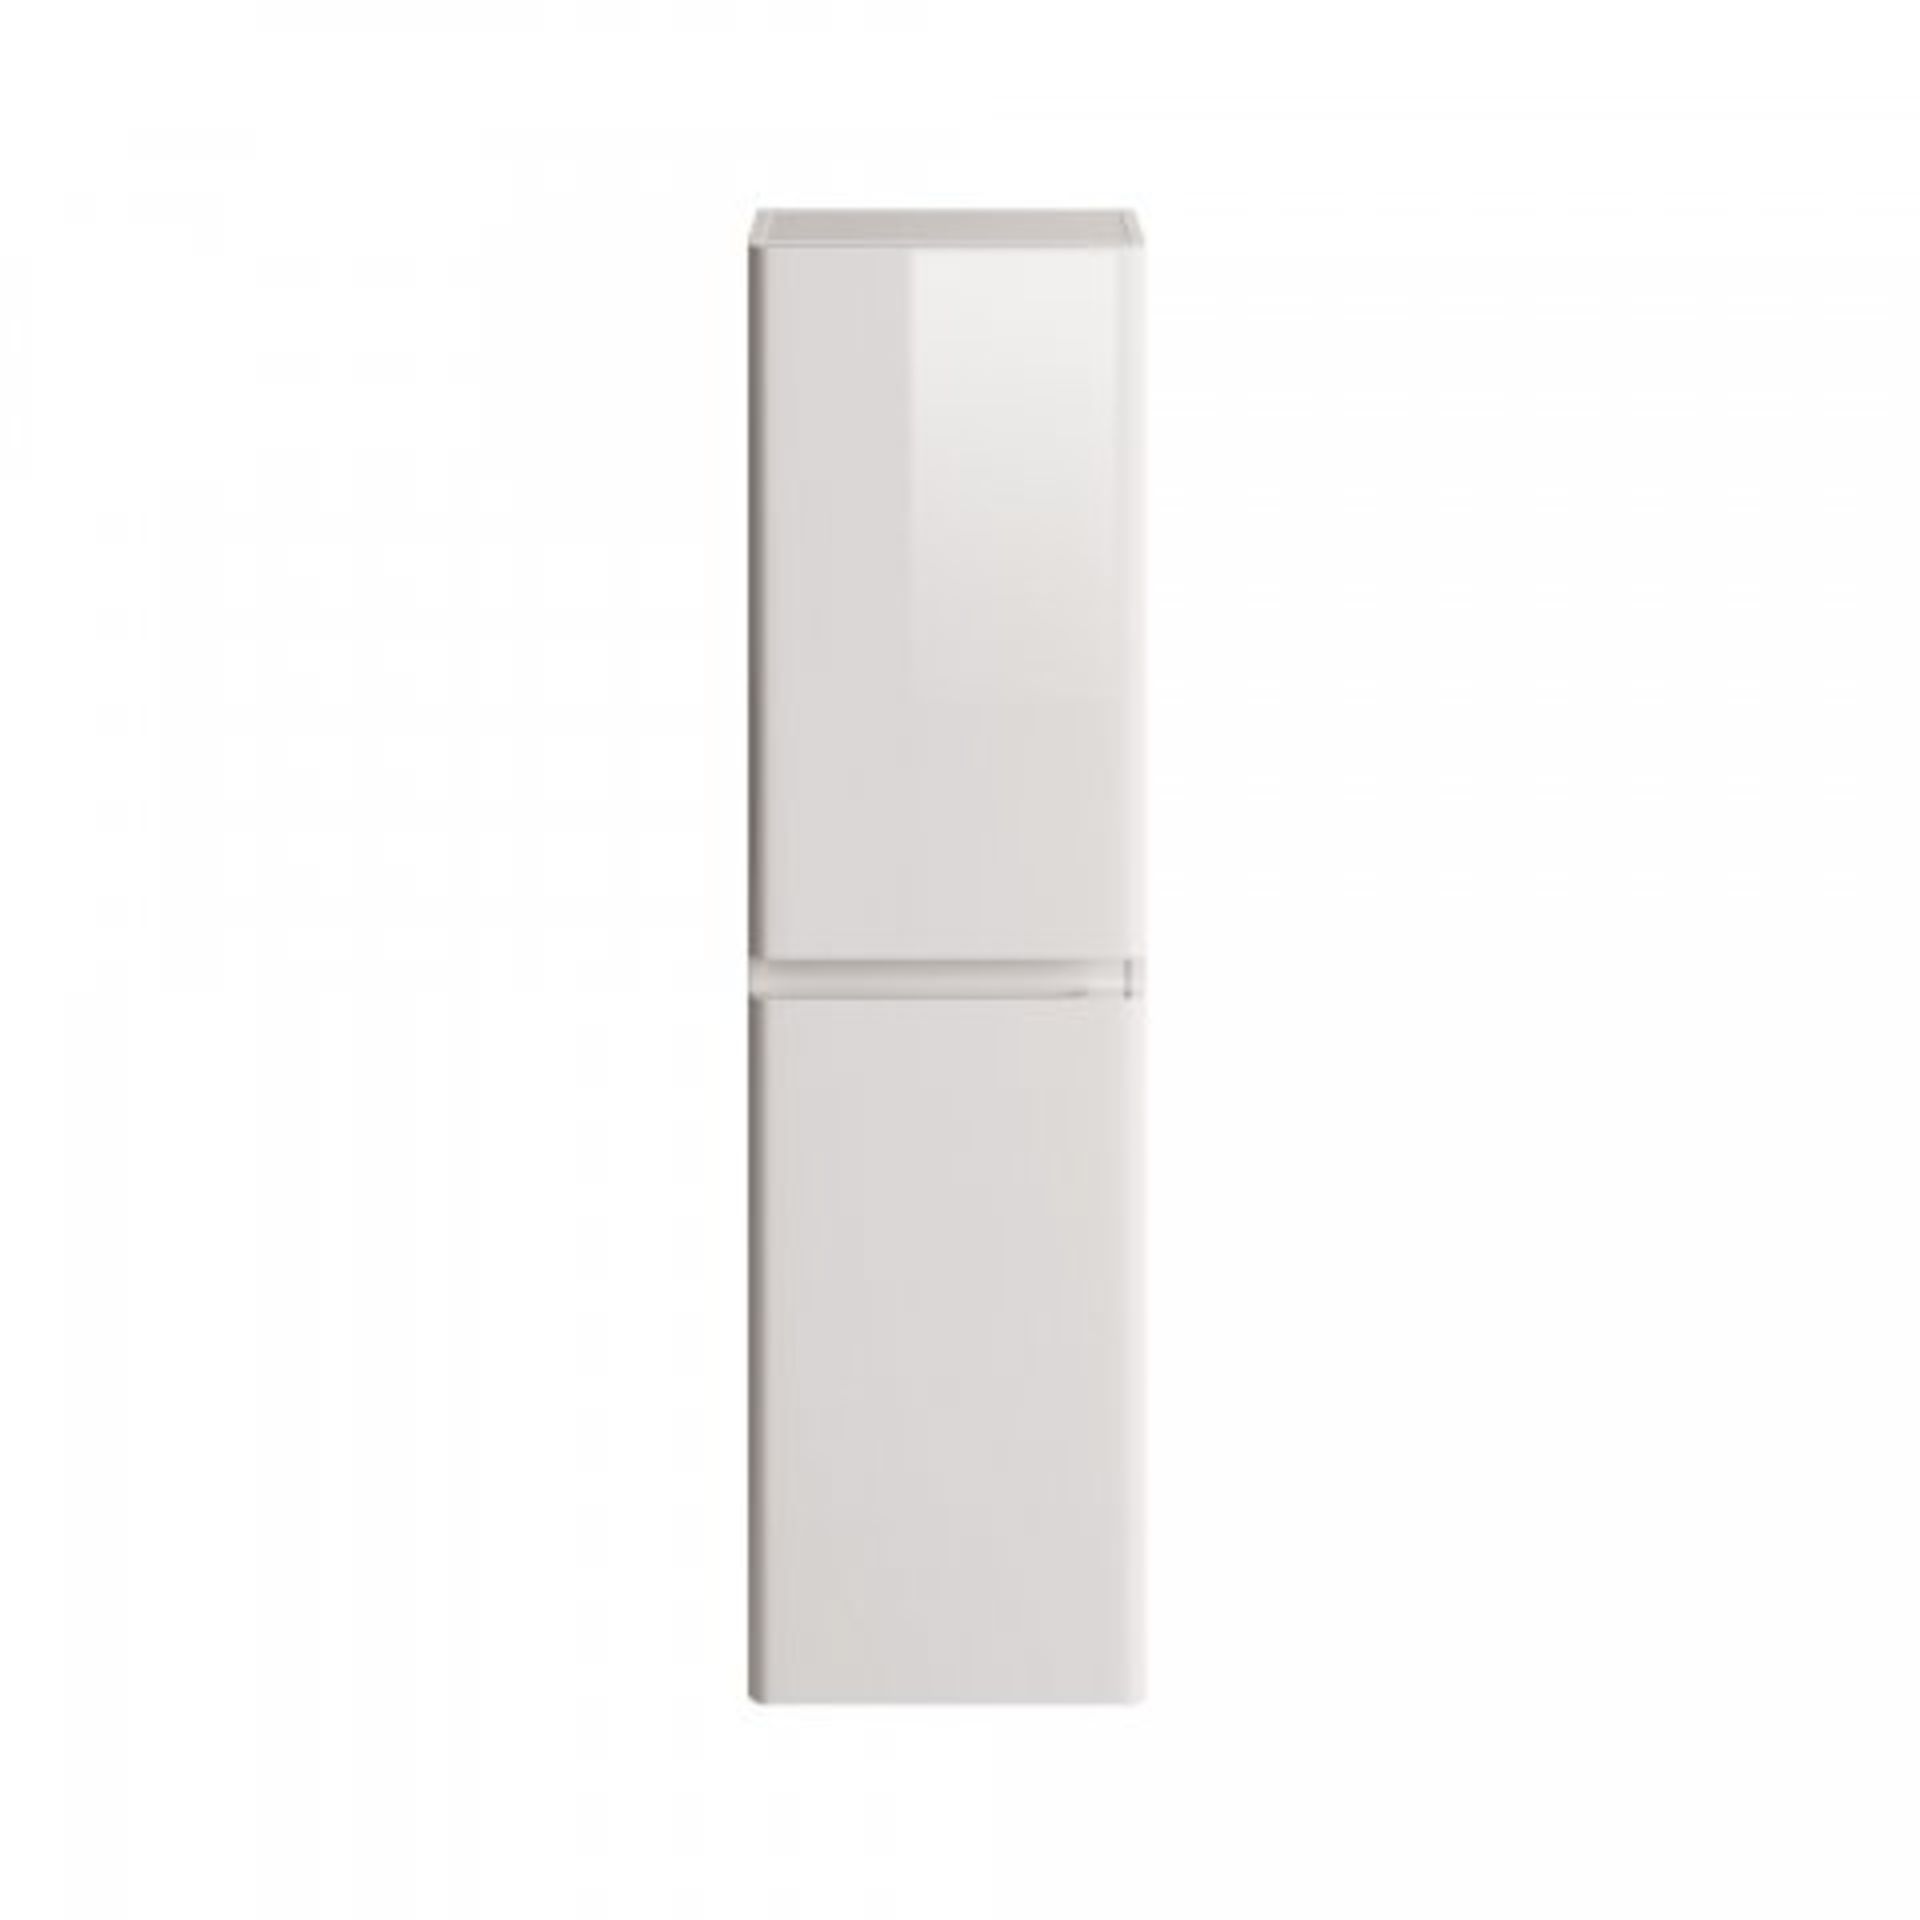 (P213) 1400mm Denver II Gloss Latte Tall Storage Cabinet - Wall Hung. RRP £299.99. With its - Image 5 of 5